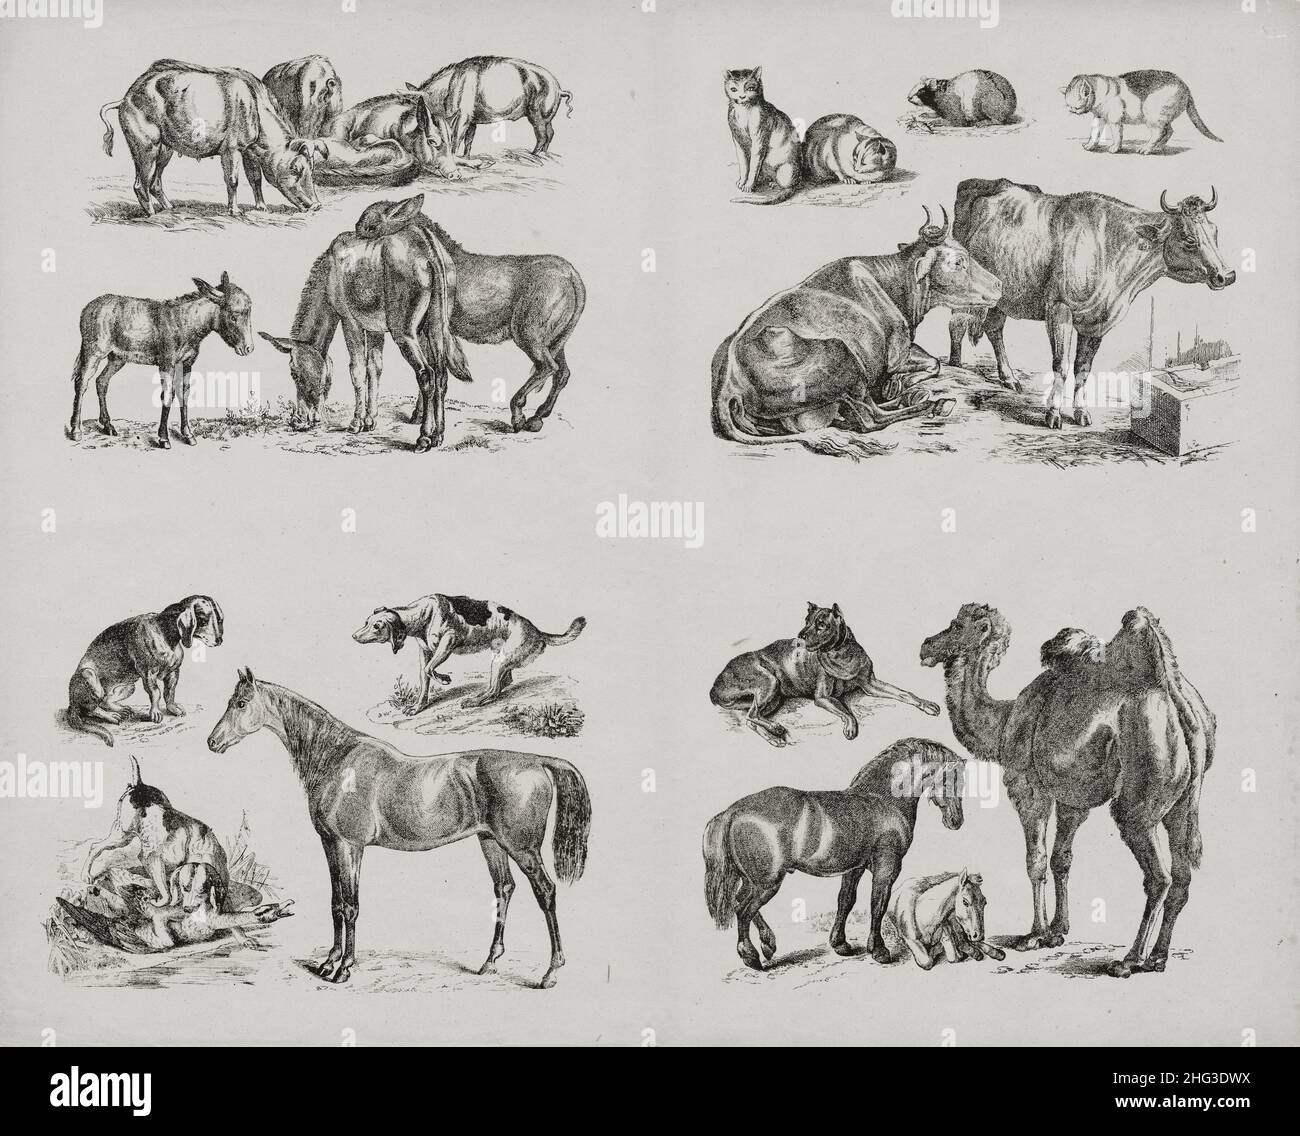 Vintage illustrations of animals. 1860 The 19th centuries drawings of pigs, cows, horses, camel, dogs, sheep, cats, guinea pig, donkeys Stock Photo